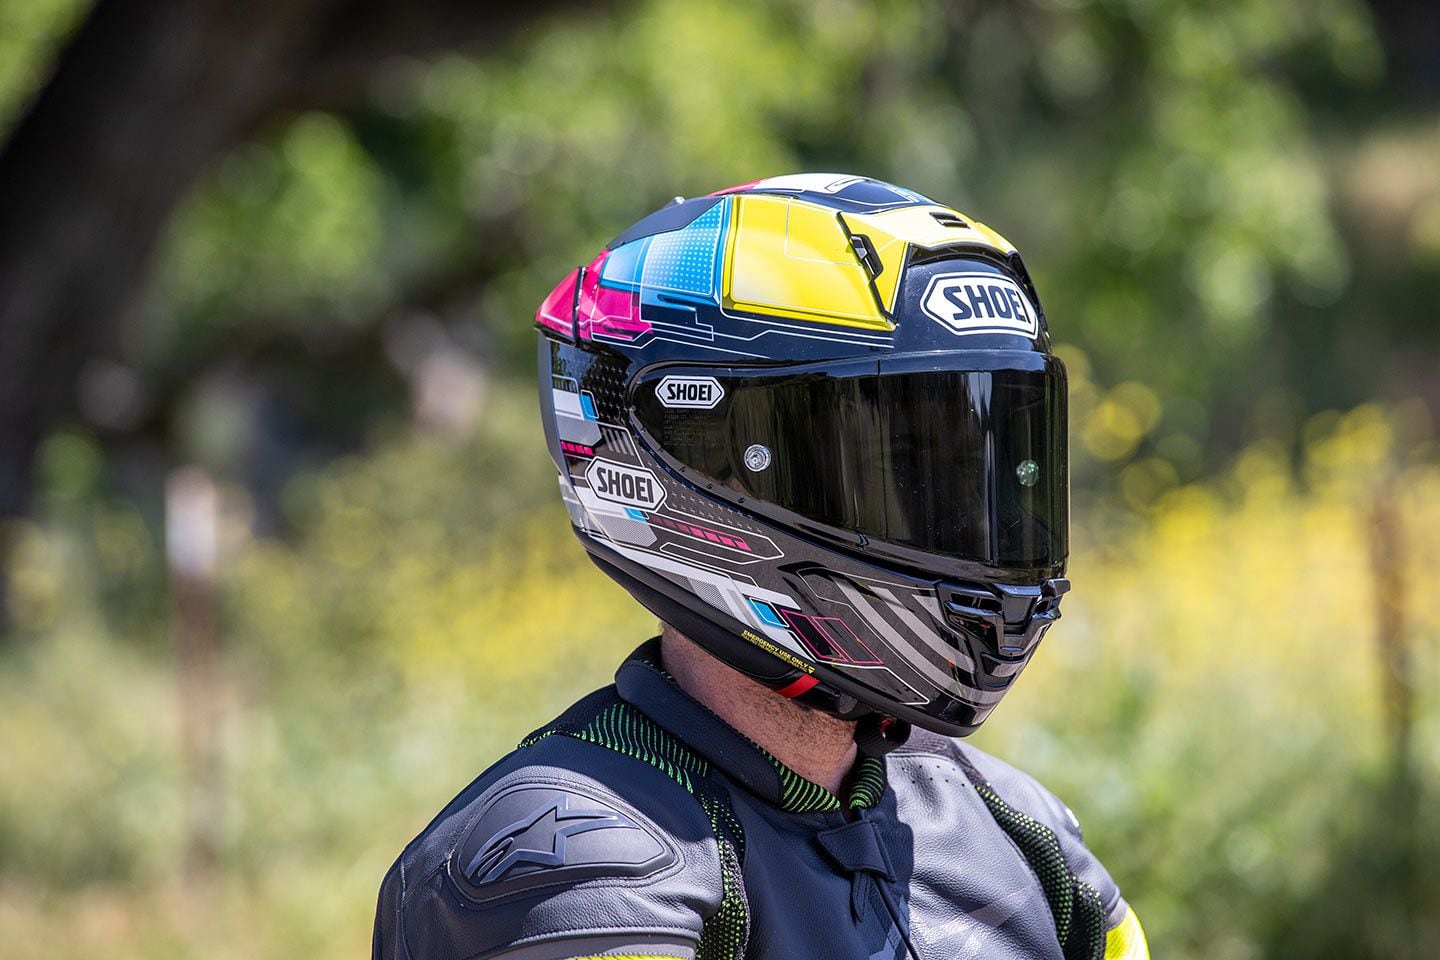 The Shoei X-Fifteen is a head-turner in Proxy TC-11 graphic ($999.99). New shell shape is intended to offer an aerodynamic advantage, but the updates don’t stop there. Notice the large eyeport and updated ventilation system.